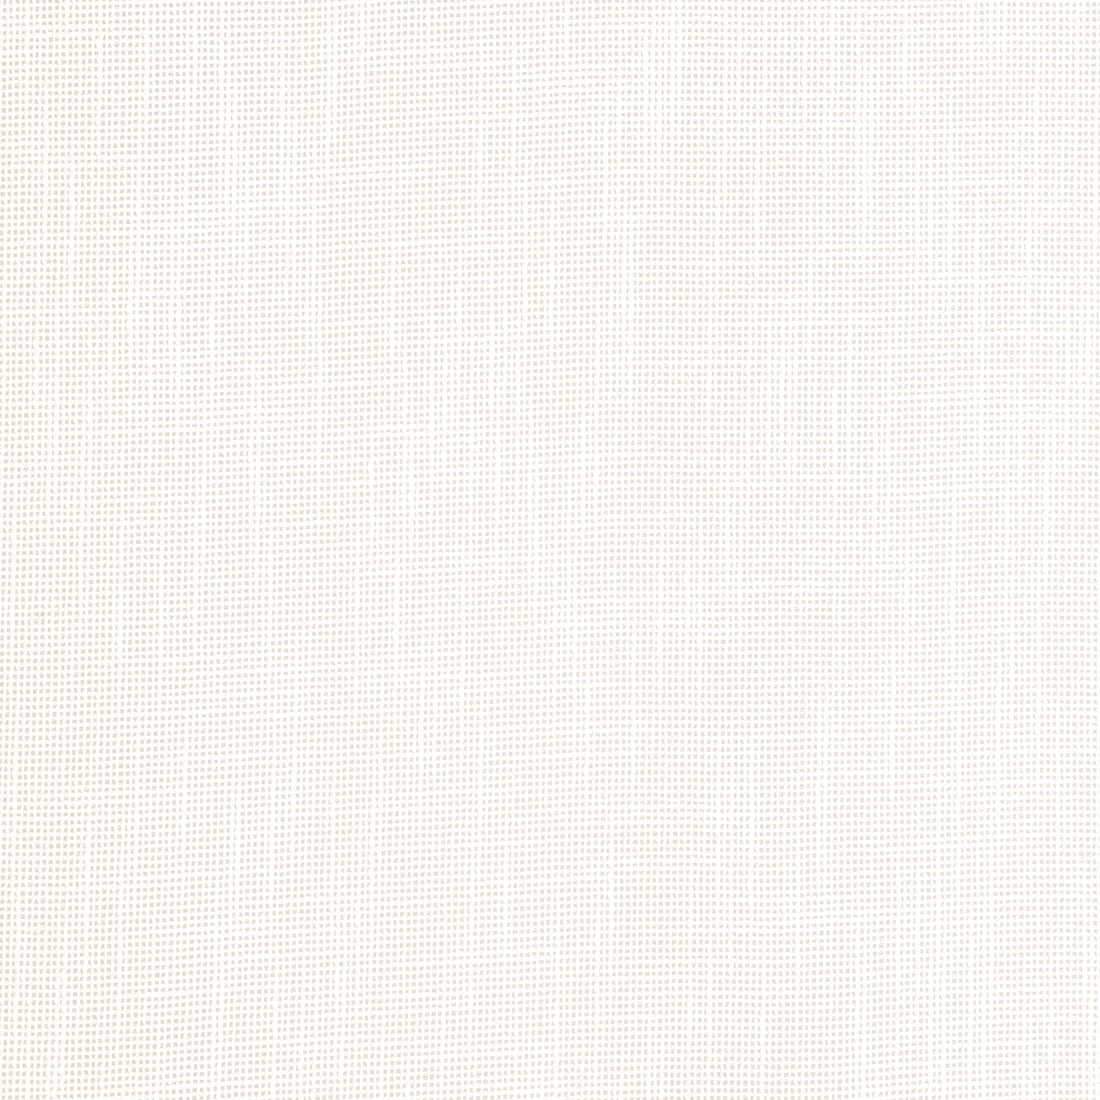 Mistral fabric in ivory color - pattern number FWW8226 - by Thibaut in the Aura collection